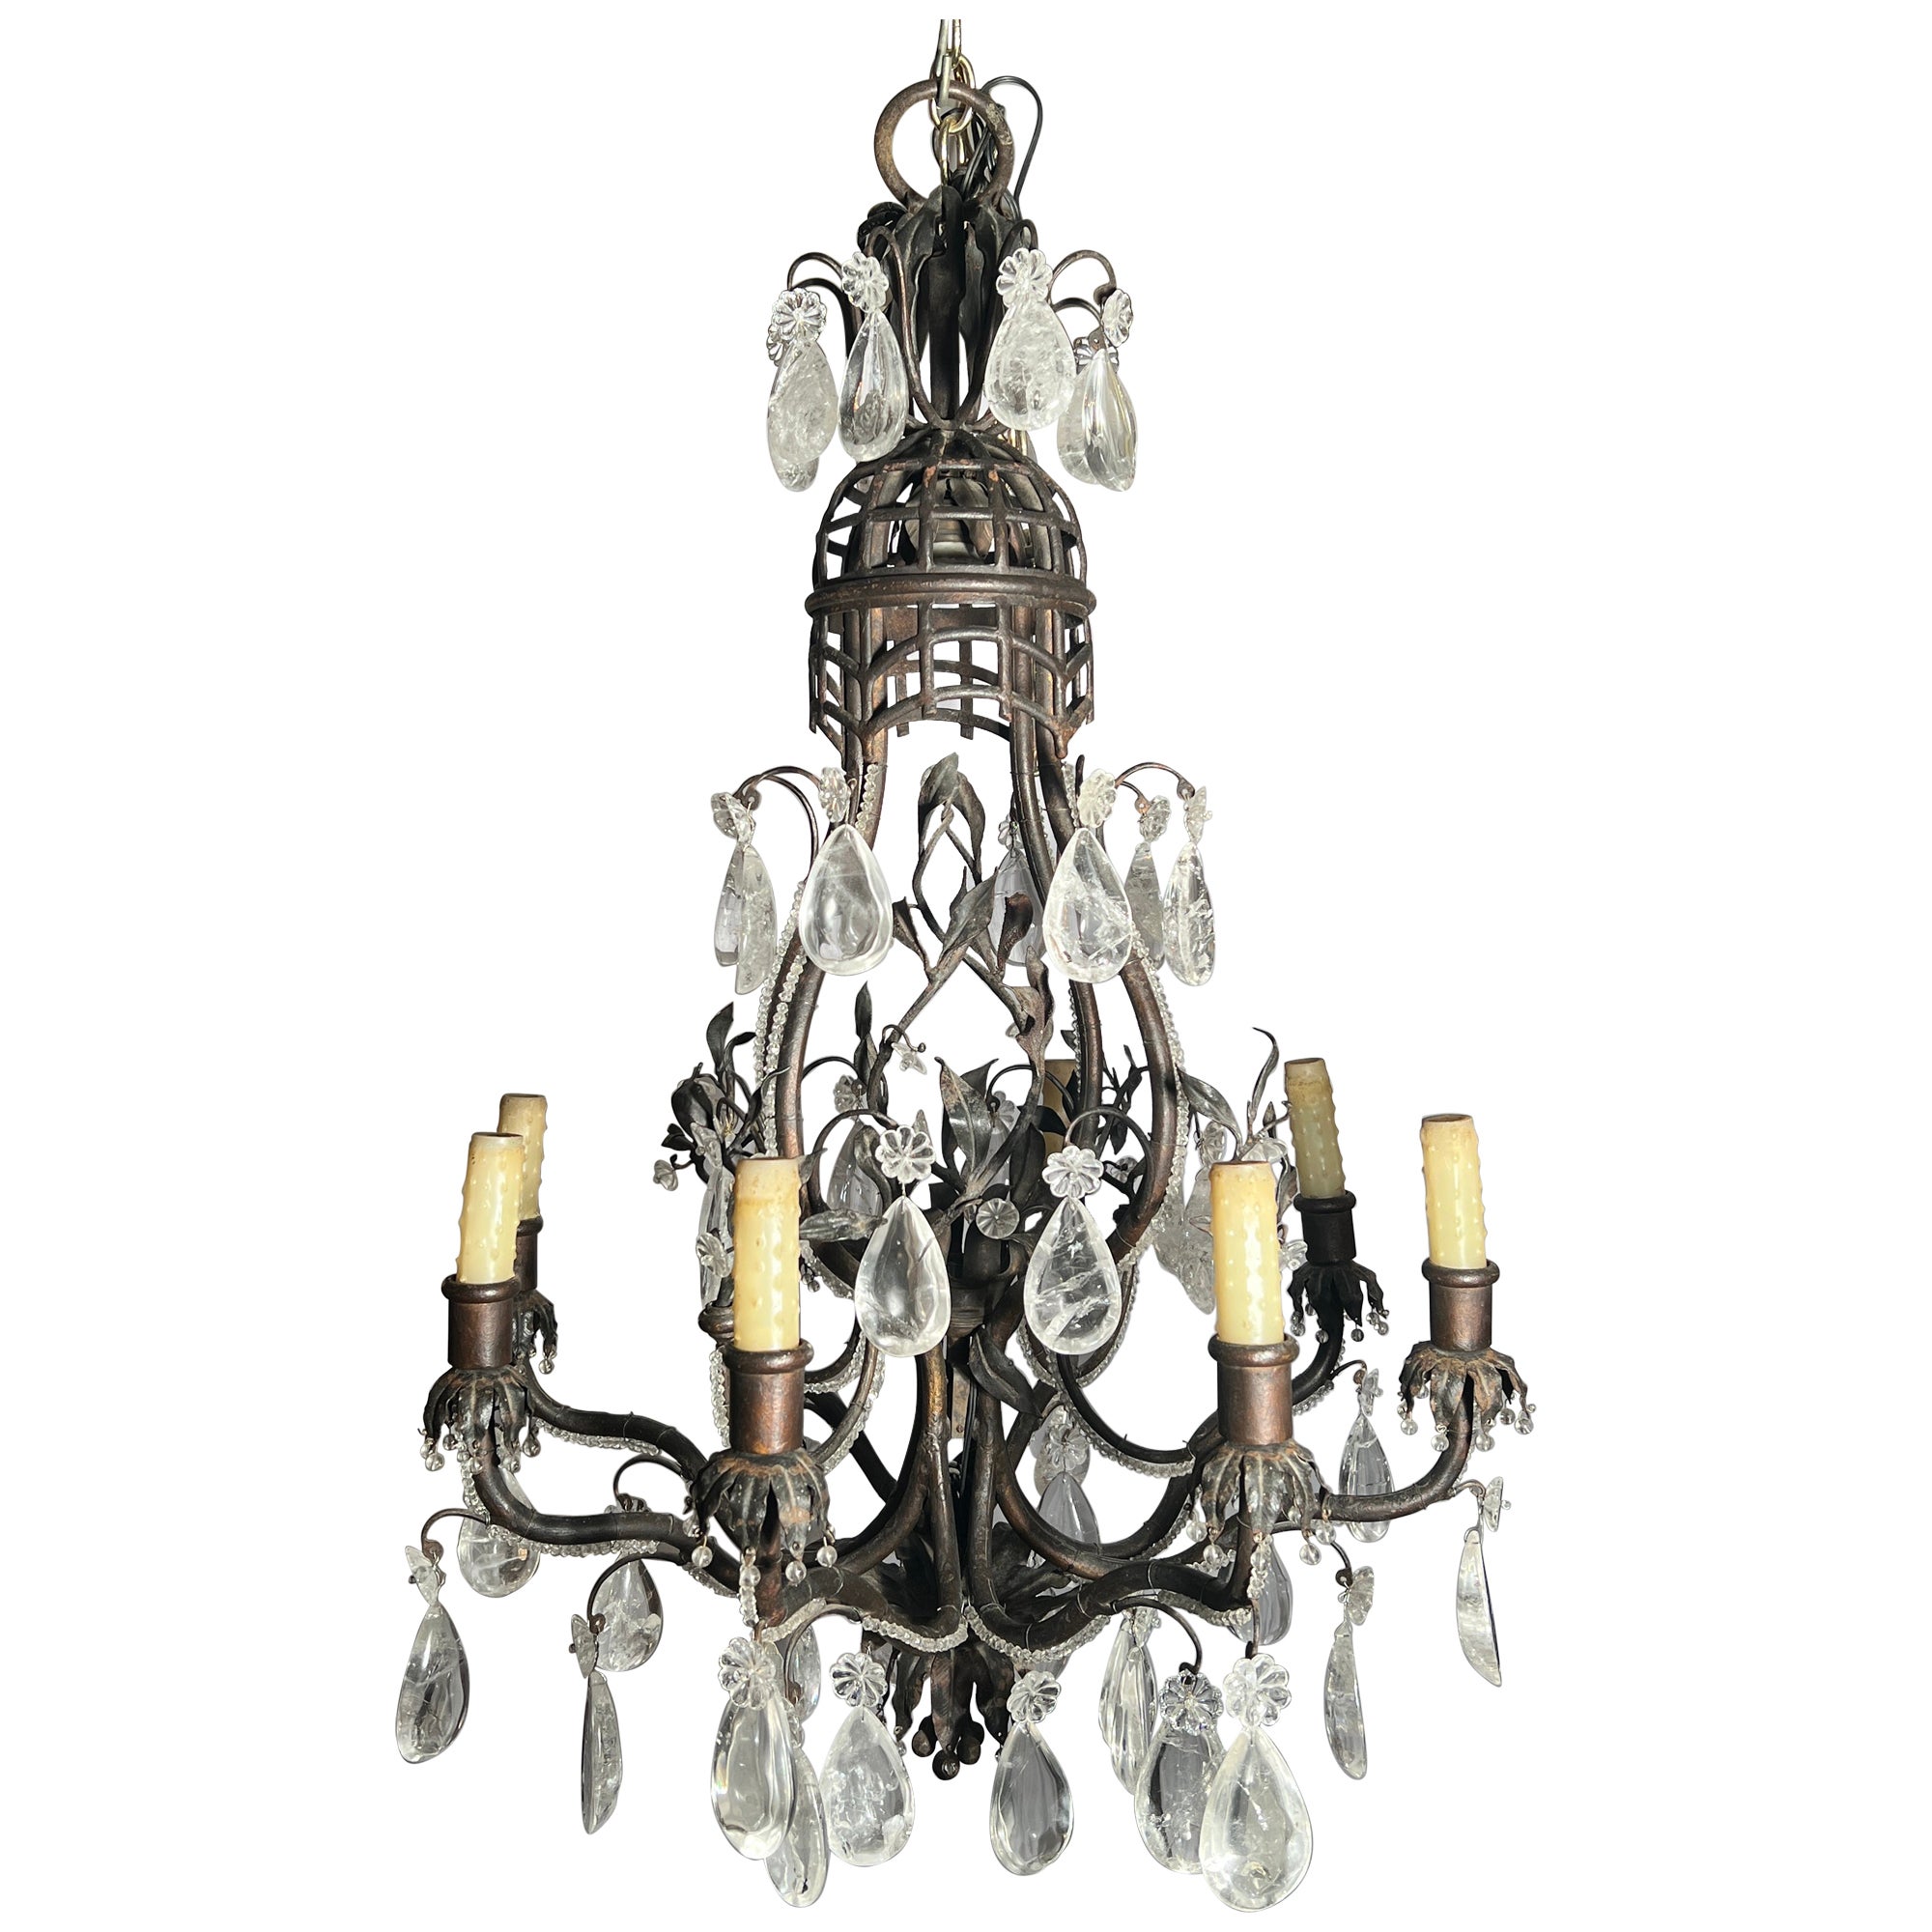 Antique 19th Century French Wrought Iron Chandelier with Rock Crystal Prisms.